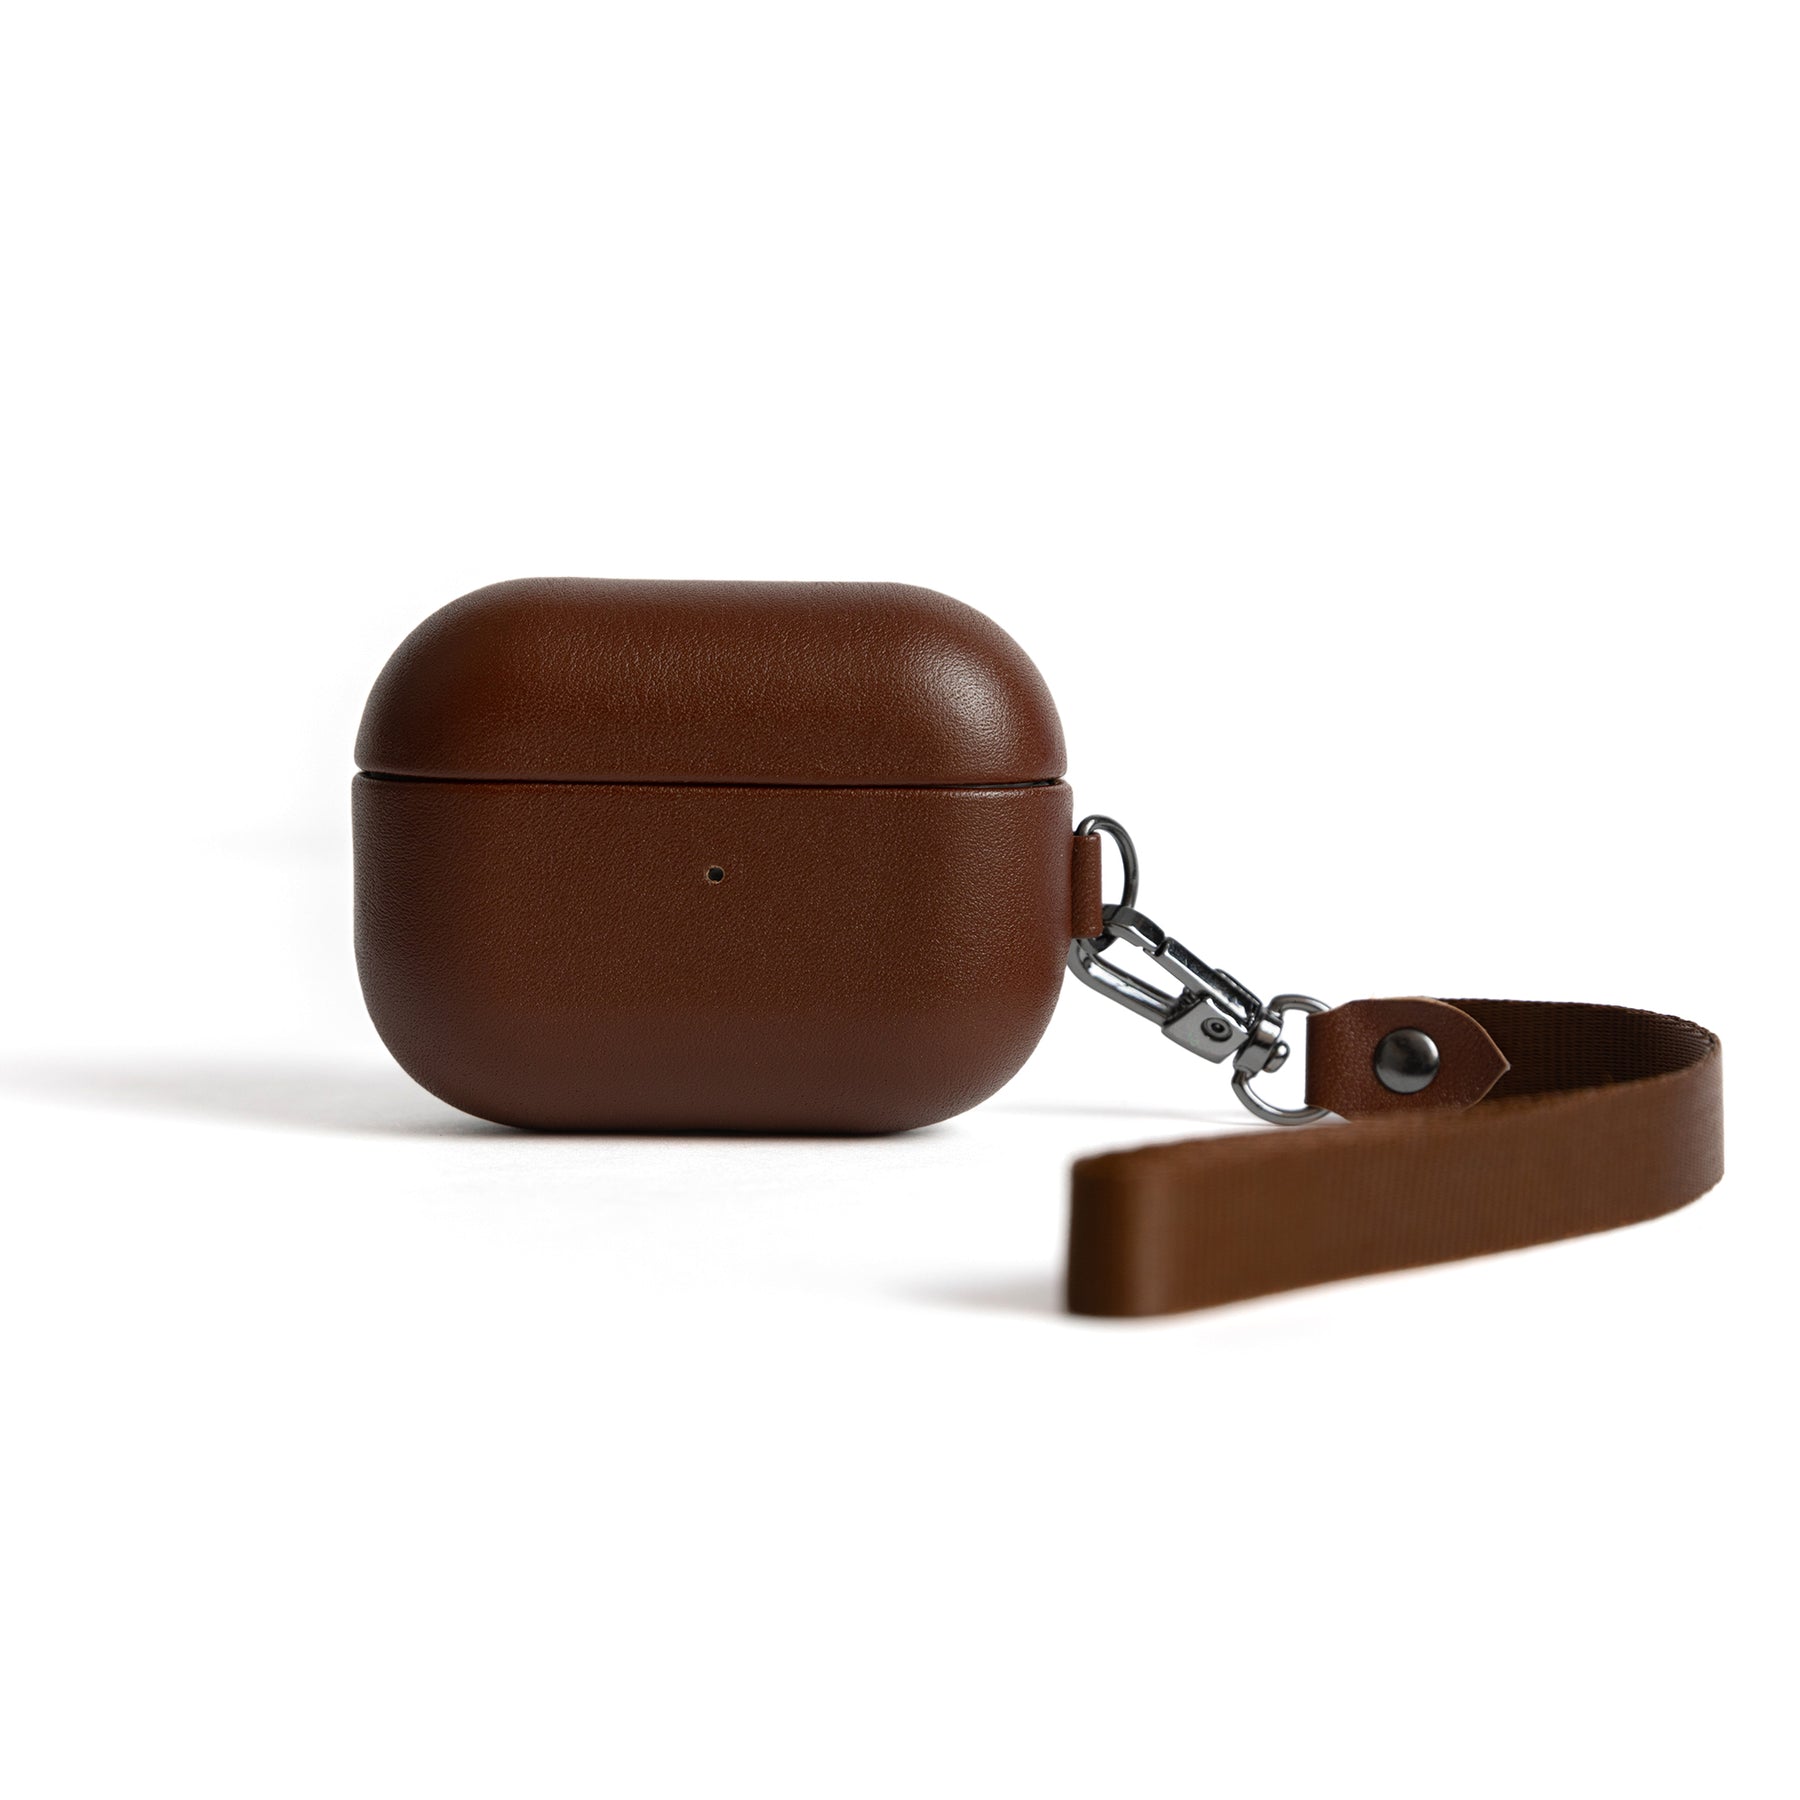  Genuine Leather Case Compatible with AirPods Pro Case